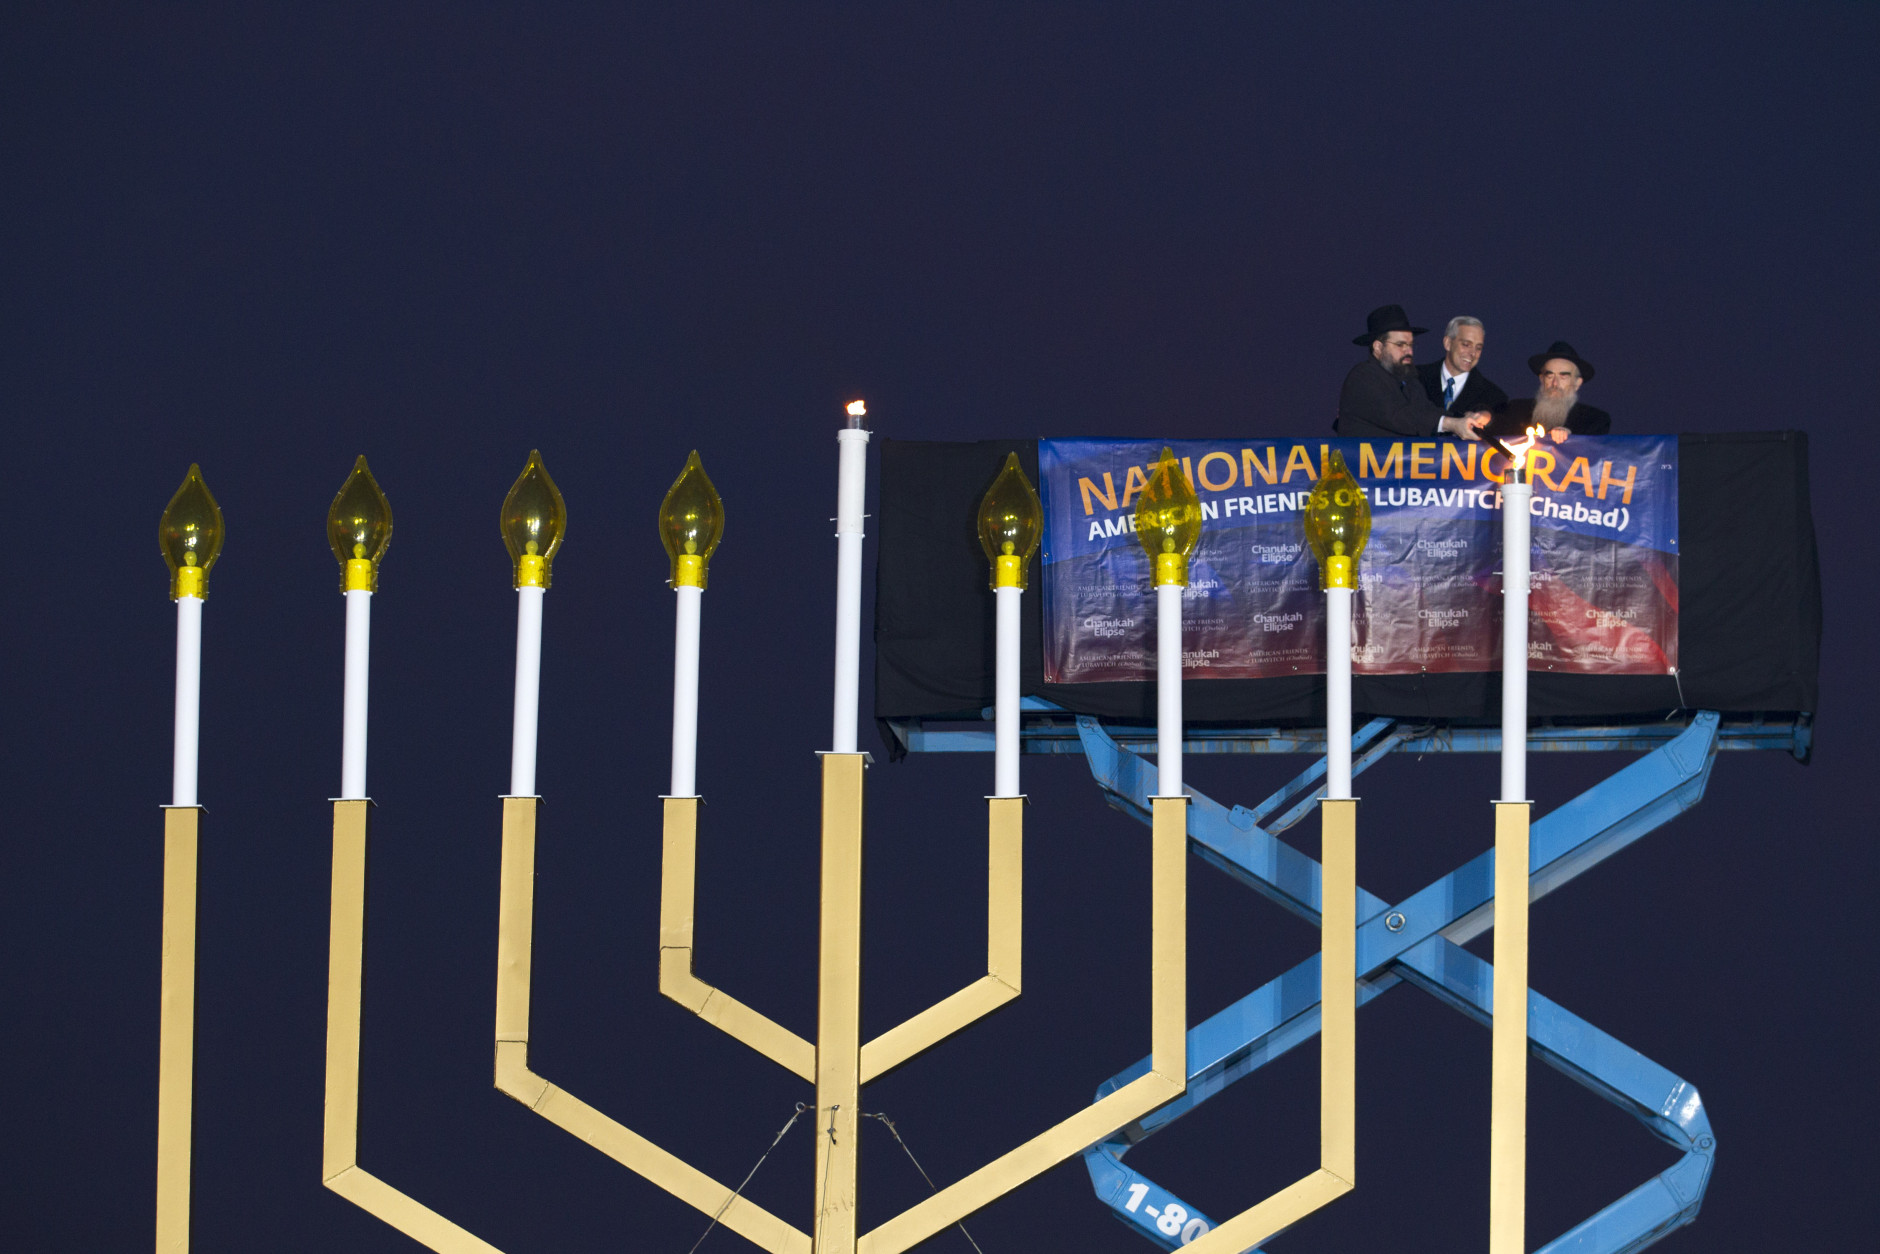 From left, Rabbi Levi Shemtov, White House Chief of Staff Denis McDonough and Rabbi Abraham Shemtov participate in the annual National Menorah Lighting in celebration of Hanukkah, on the Ellipse near the White House in Washington, Sunday, Dec. 6, 2015. (AP Photo/Jose Luis Magana)